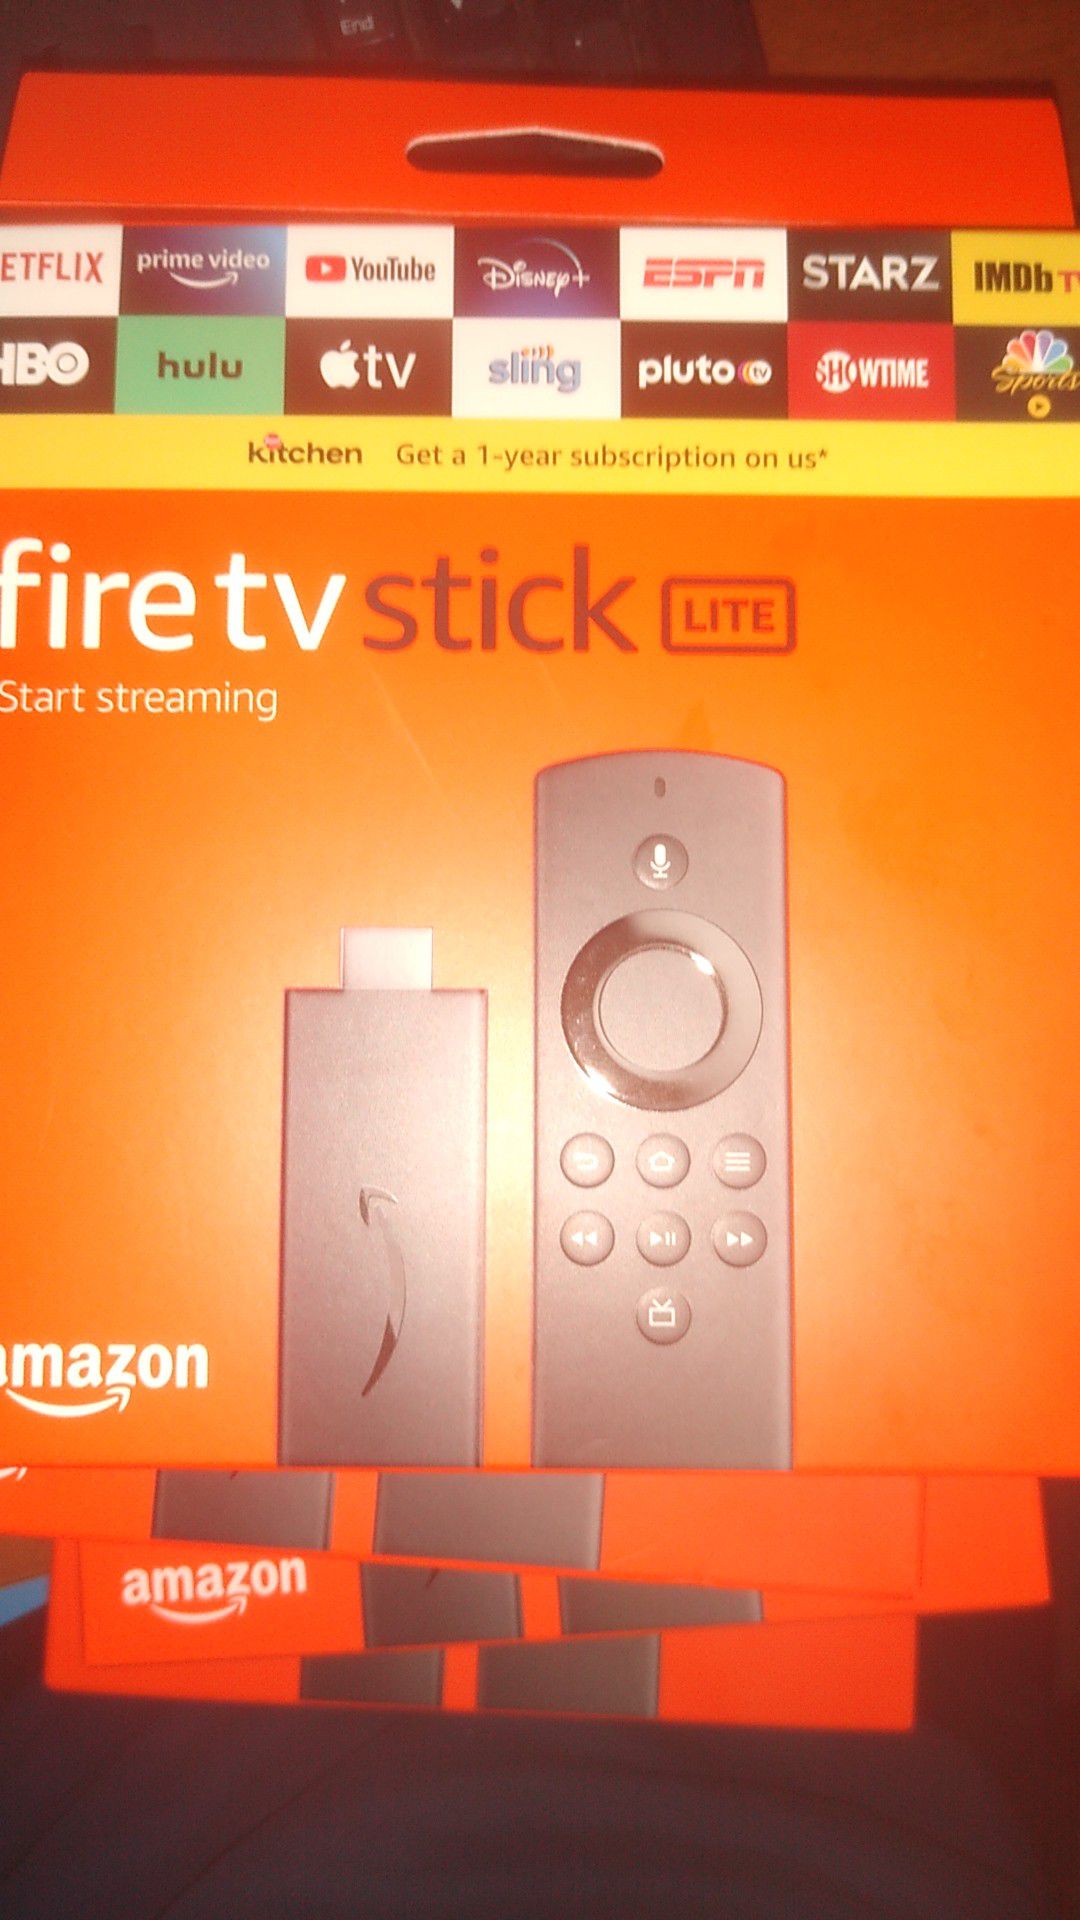 💥Pay Per View • Sports •Live TV• Movies •Shows•Etc {UNLOCKED FIRE STICK TV}💥